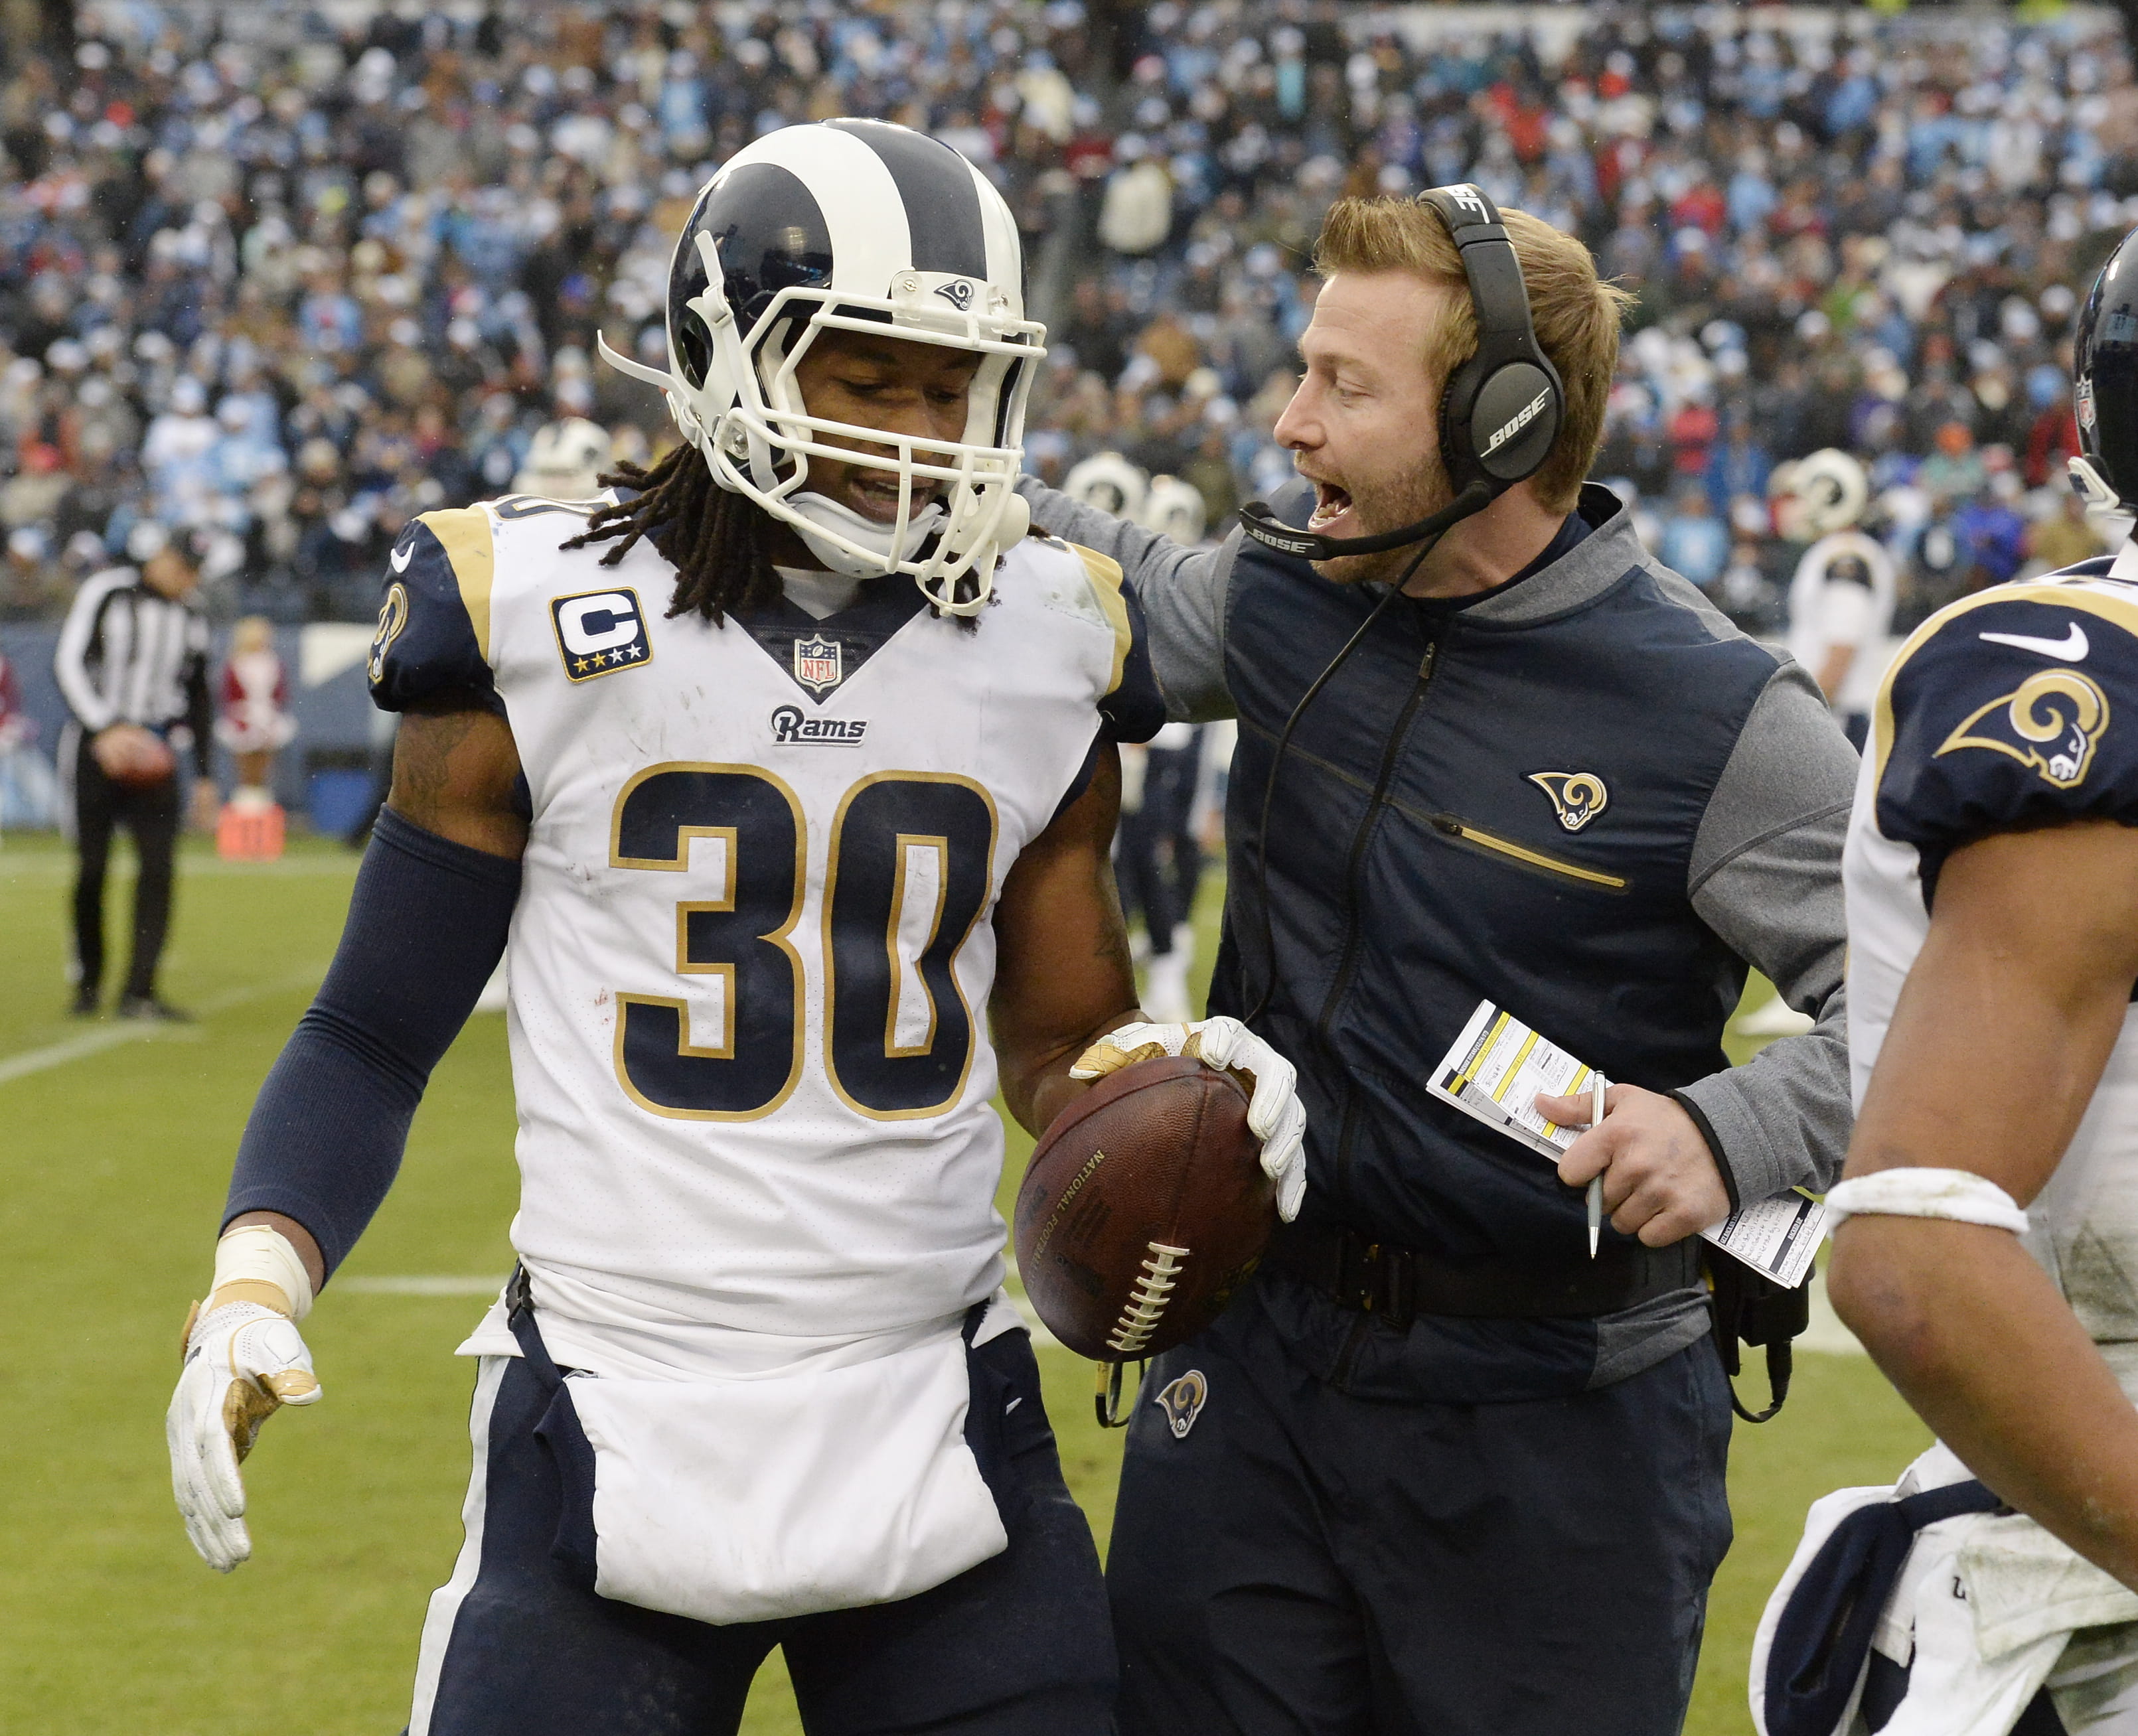 Los Angeles Rams coach Sean McVay congratulates running back Todd Gurley after a touchdown against the Tennessee Titans in December 2017.